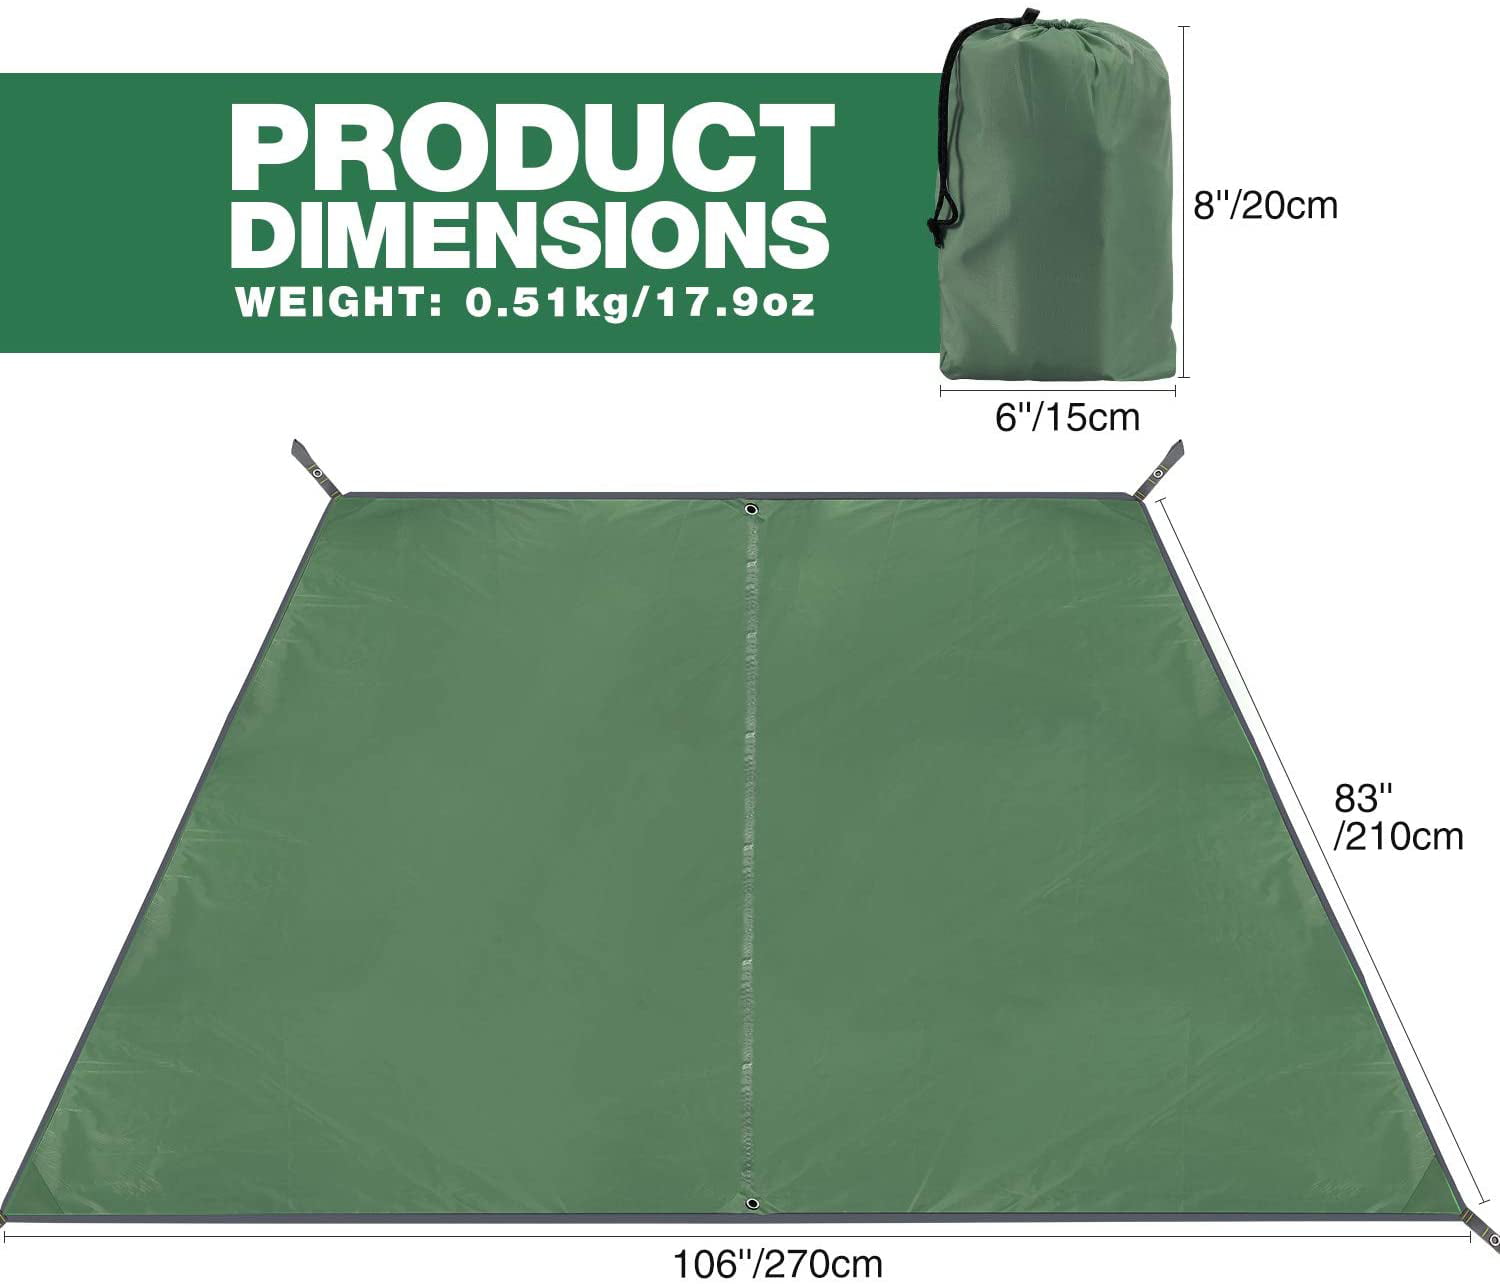 Black/Blue/Green REDCAMP Waterproof Camping Tarp Lightweight to Cover Sun or Rain Small/Large 8 Sizes Compact Tent Tarp Footprint for Ground or Under Tent